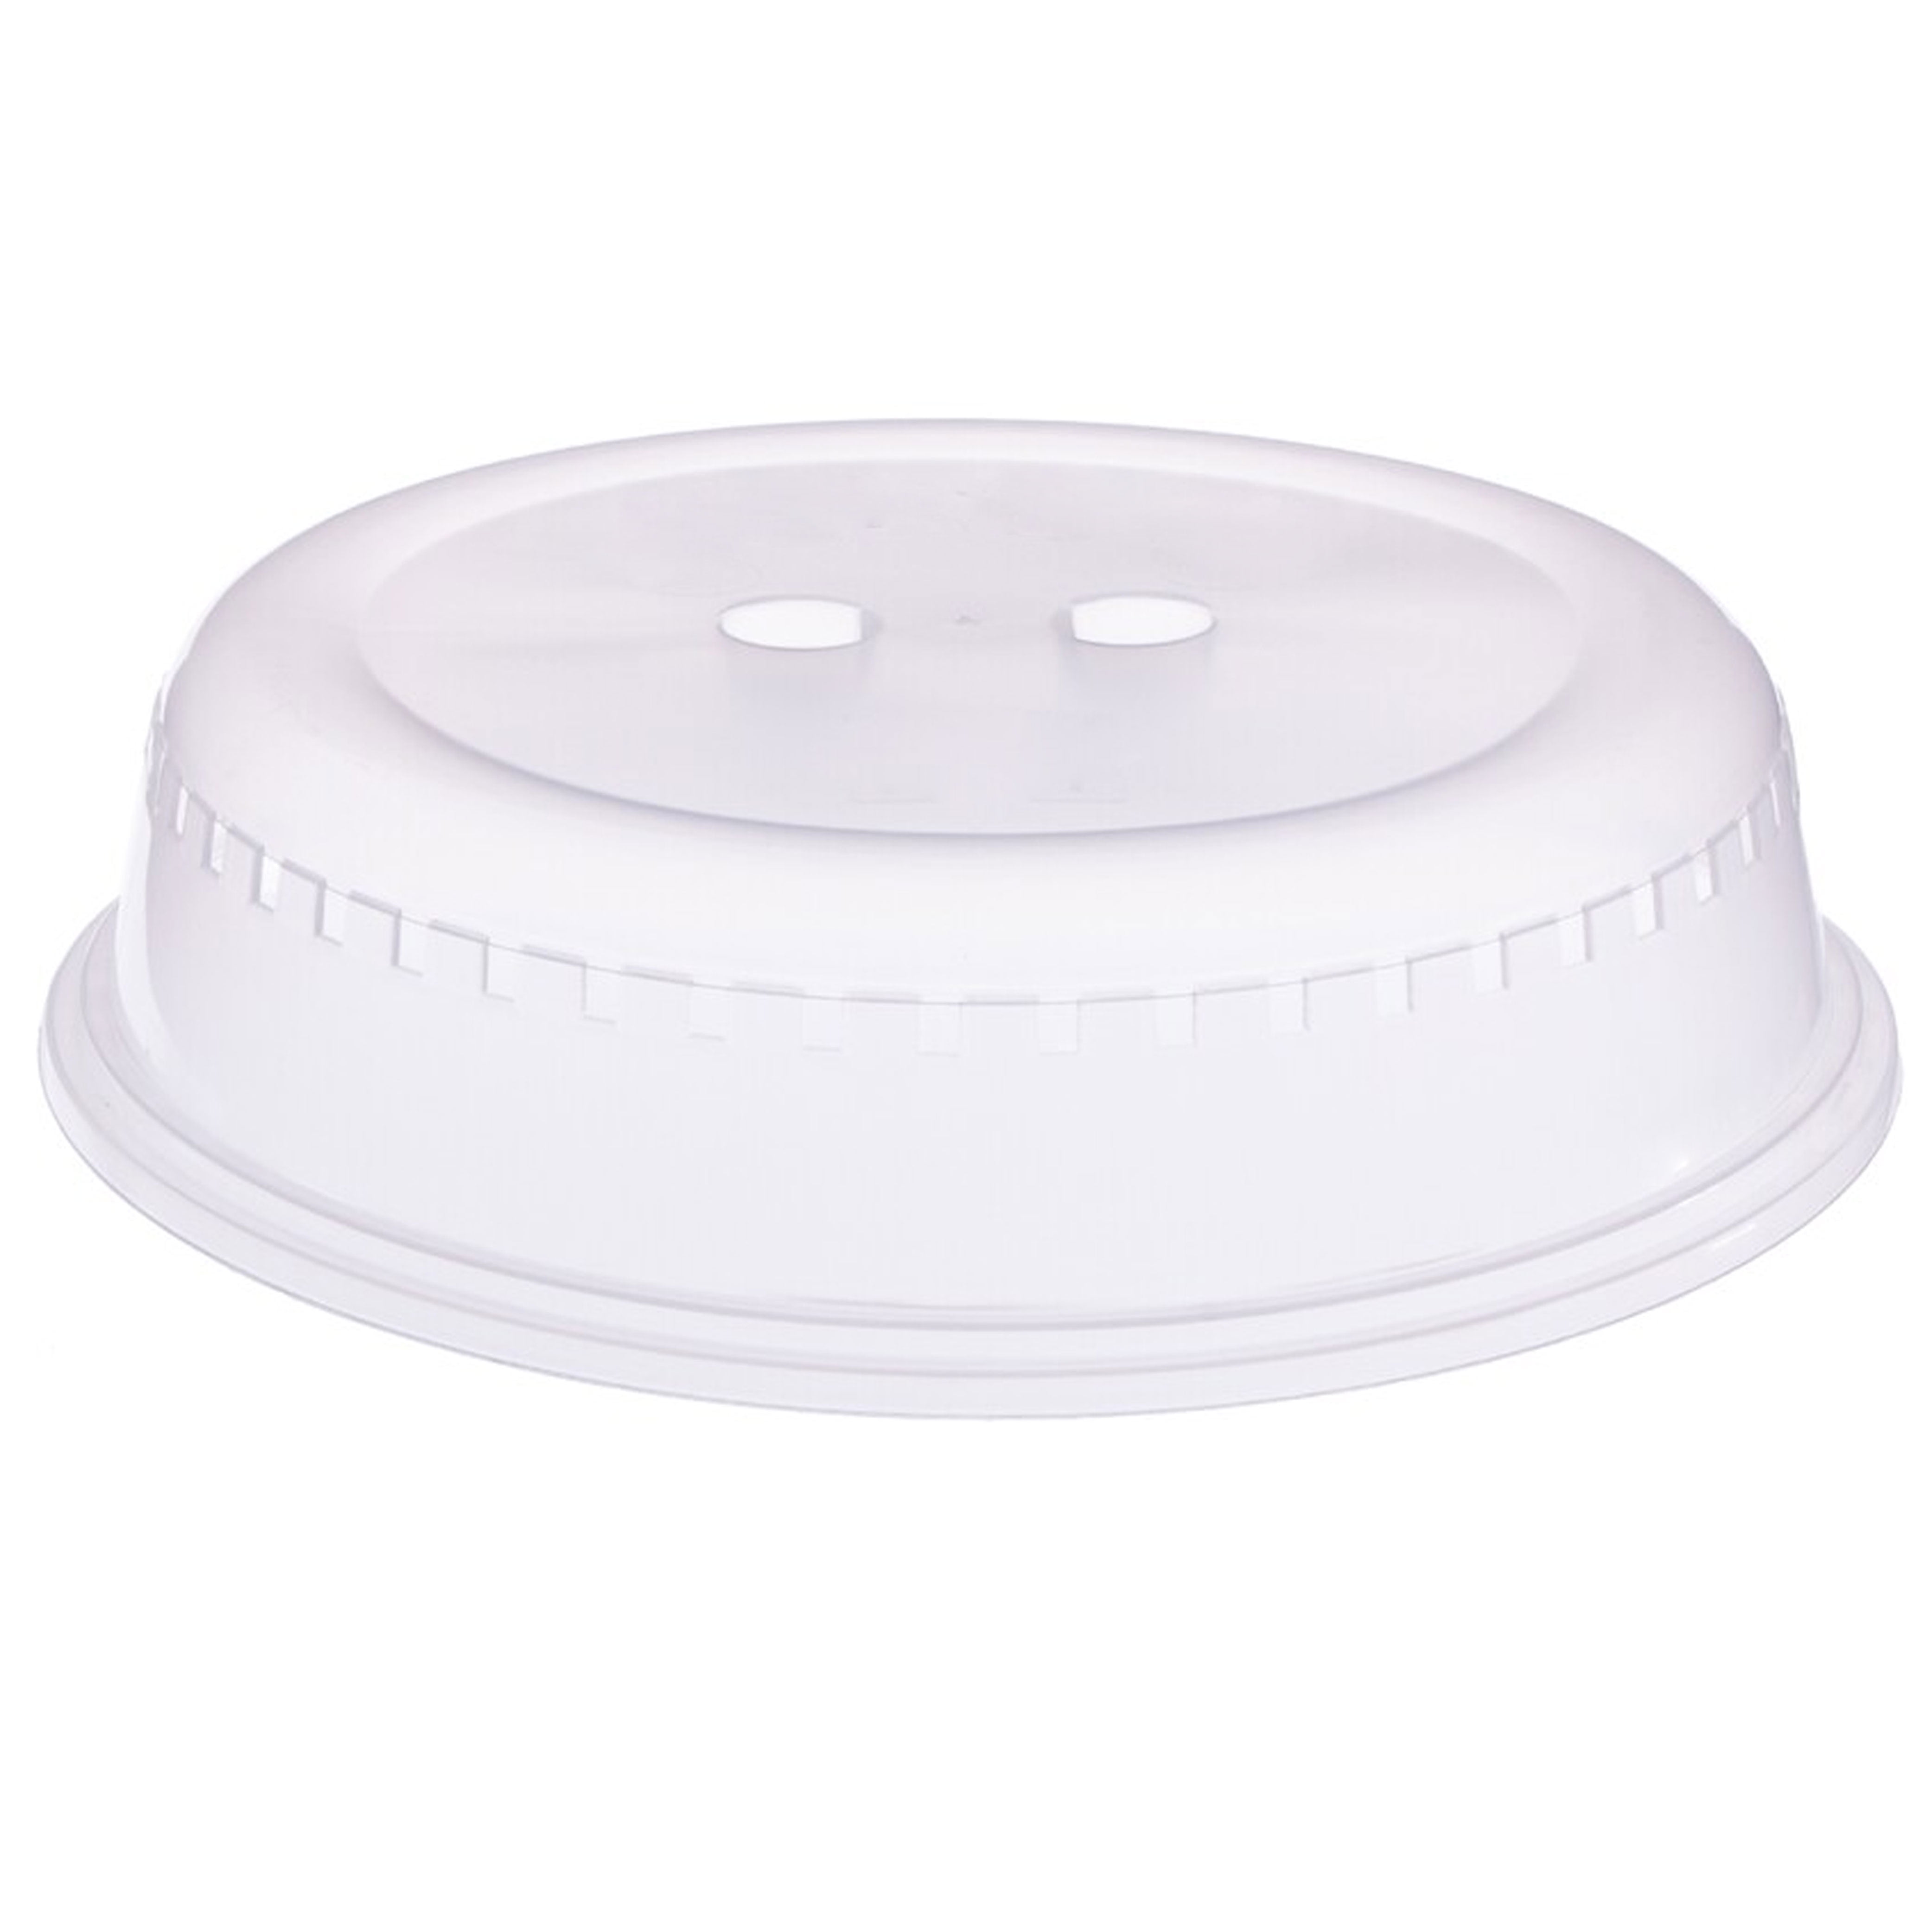 HomeCraft HCMPCS10CL 10 in. Plastic Microwave Plate COver Lid